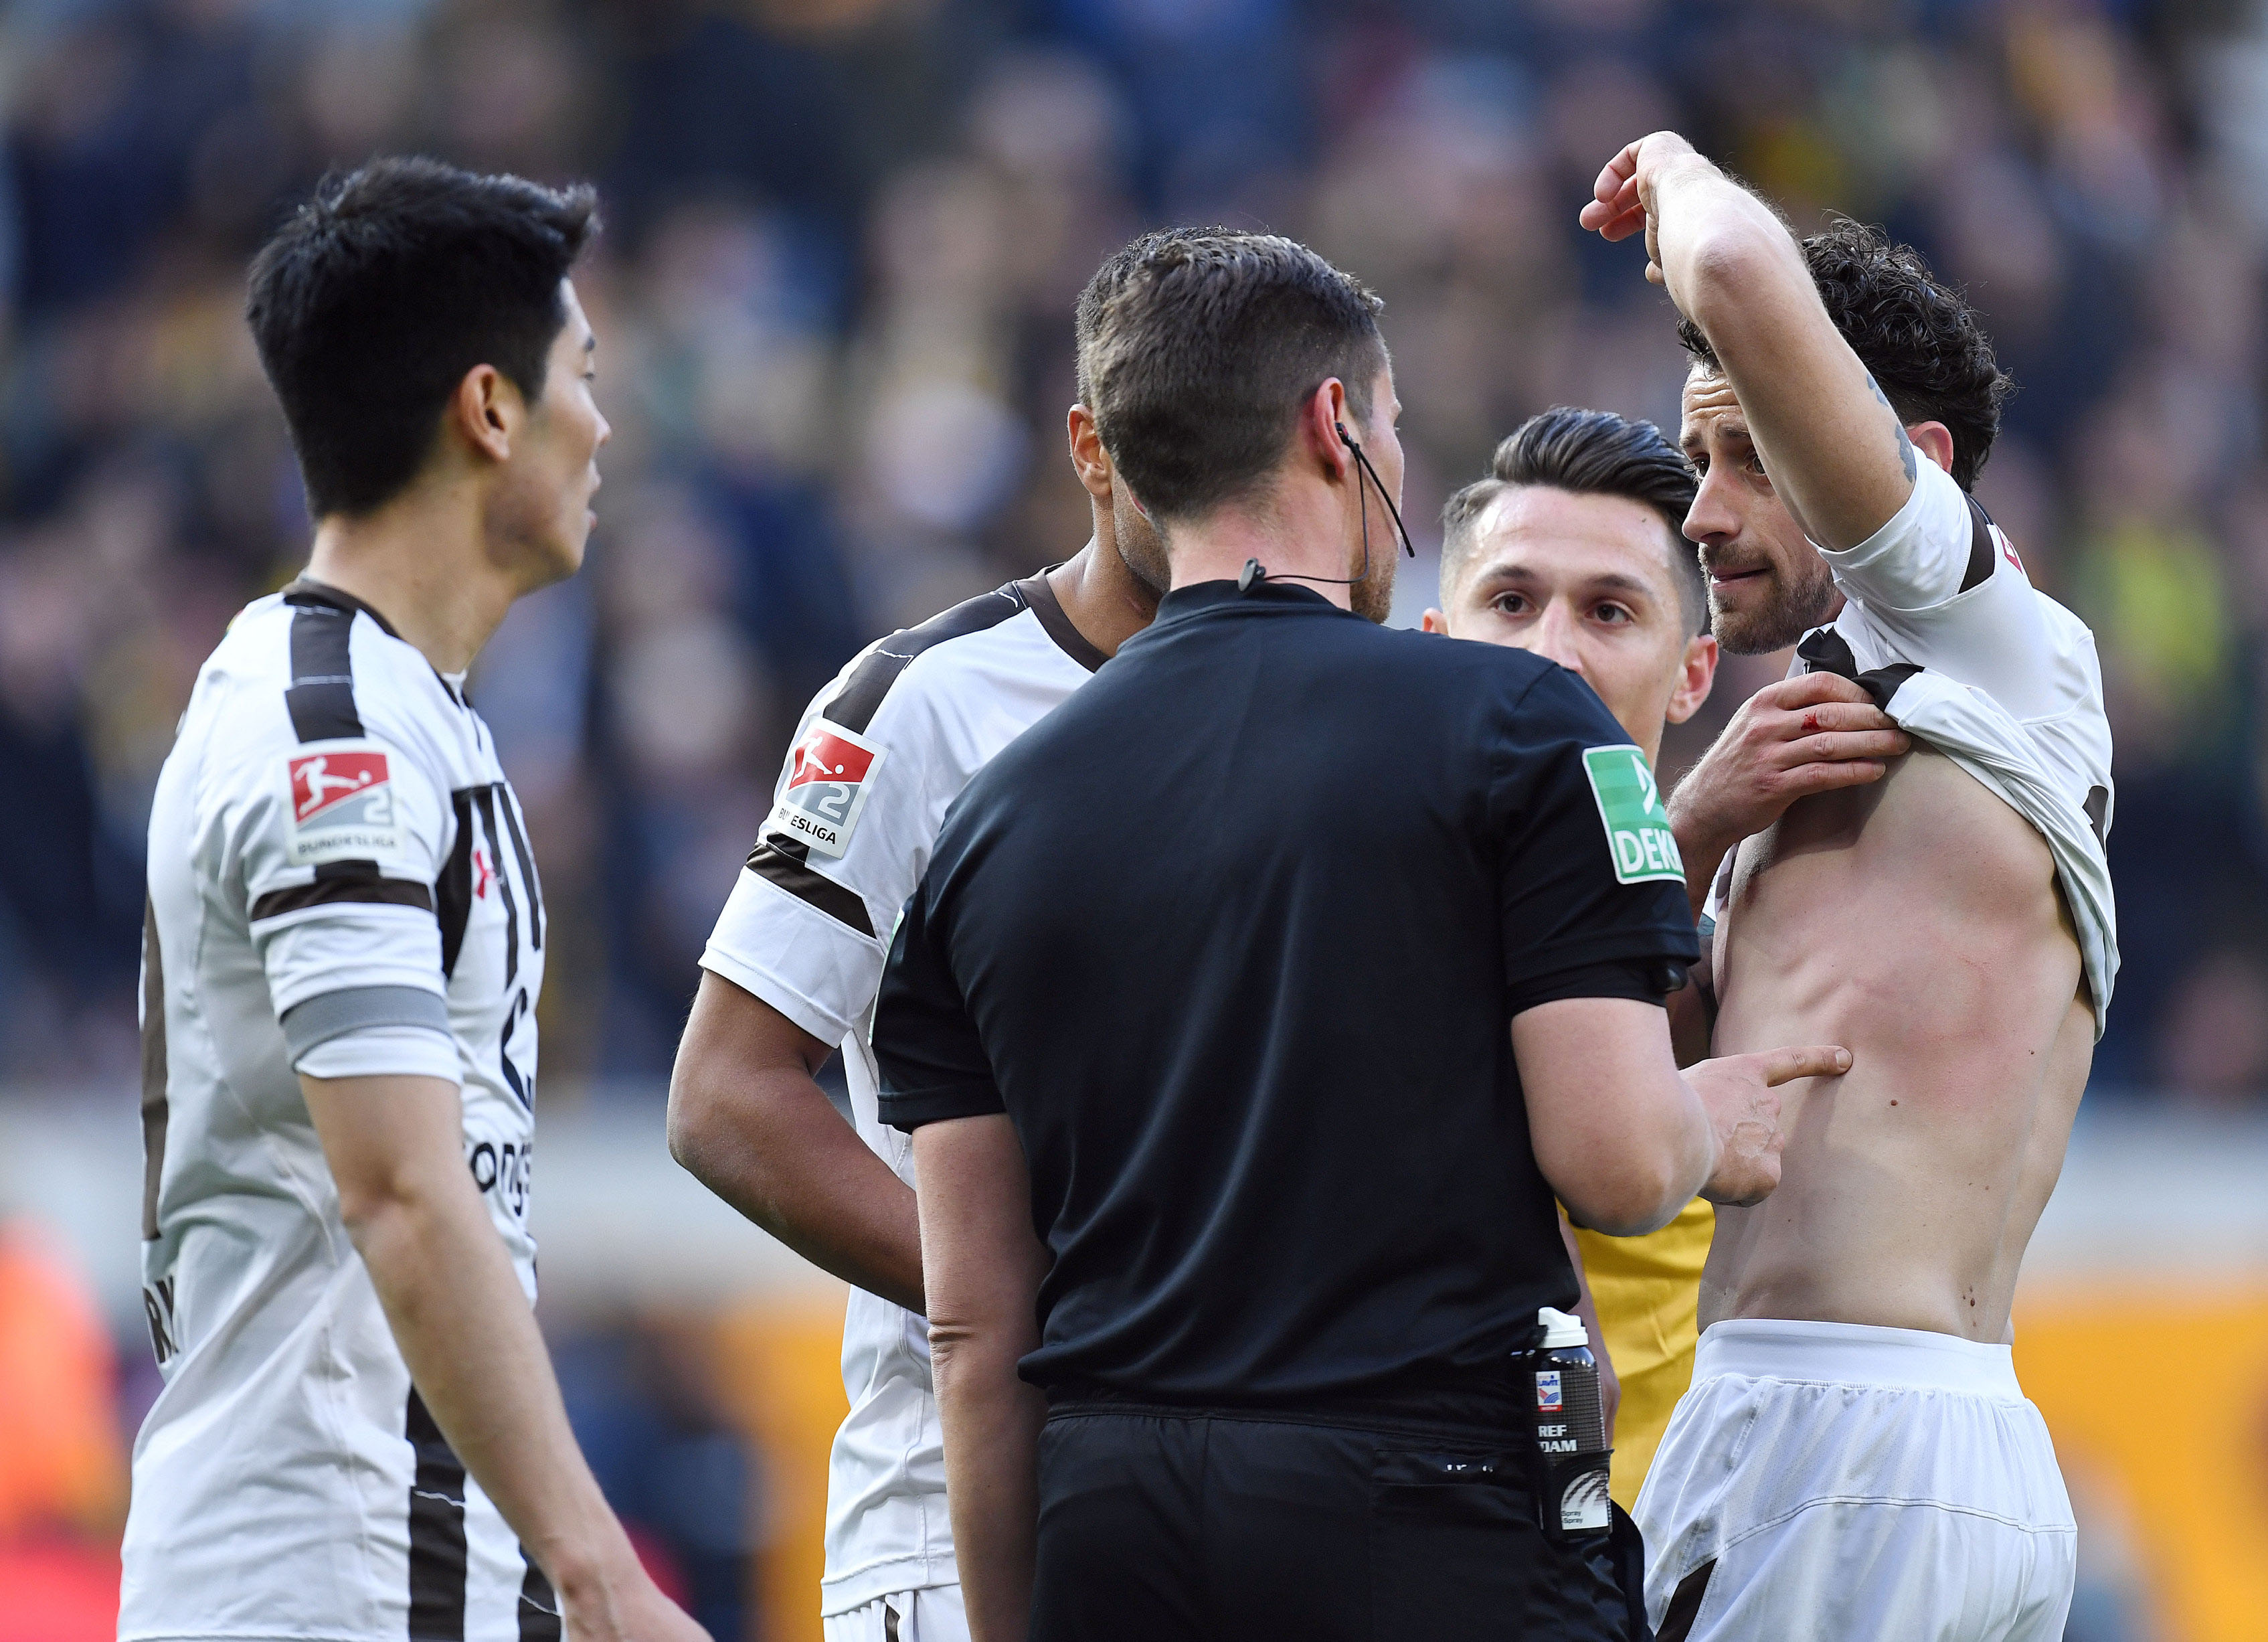 Jan-Philipp Kalla shows referee Robert Kempter the mark left by the ball on his upper body.